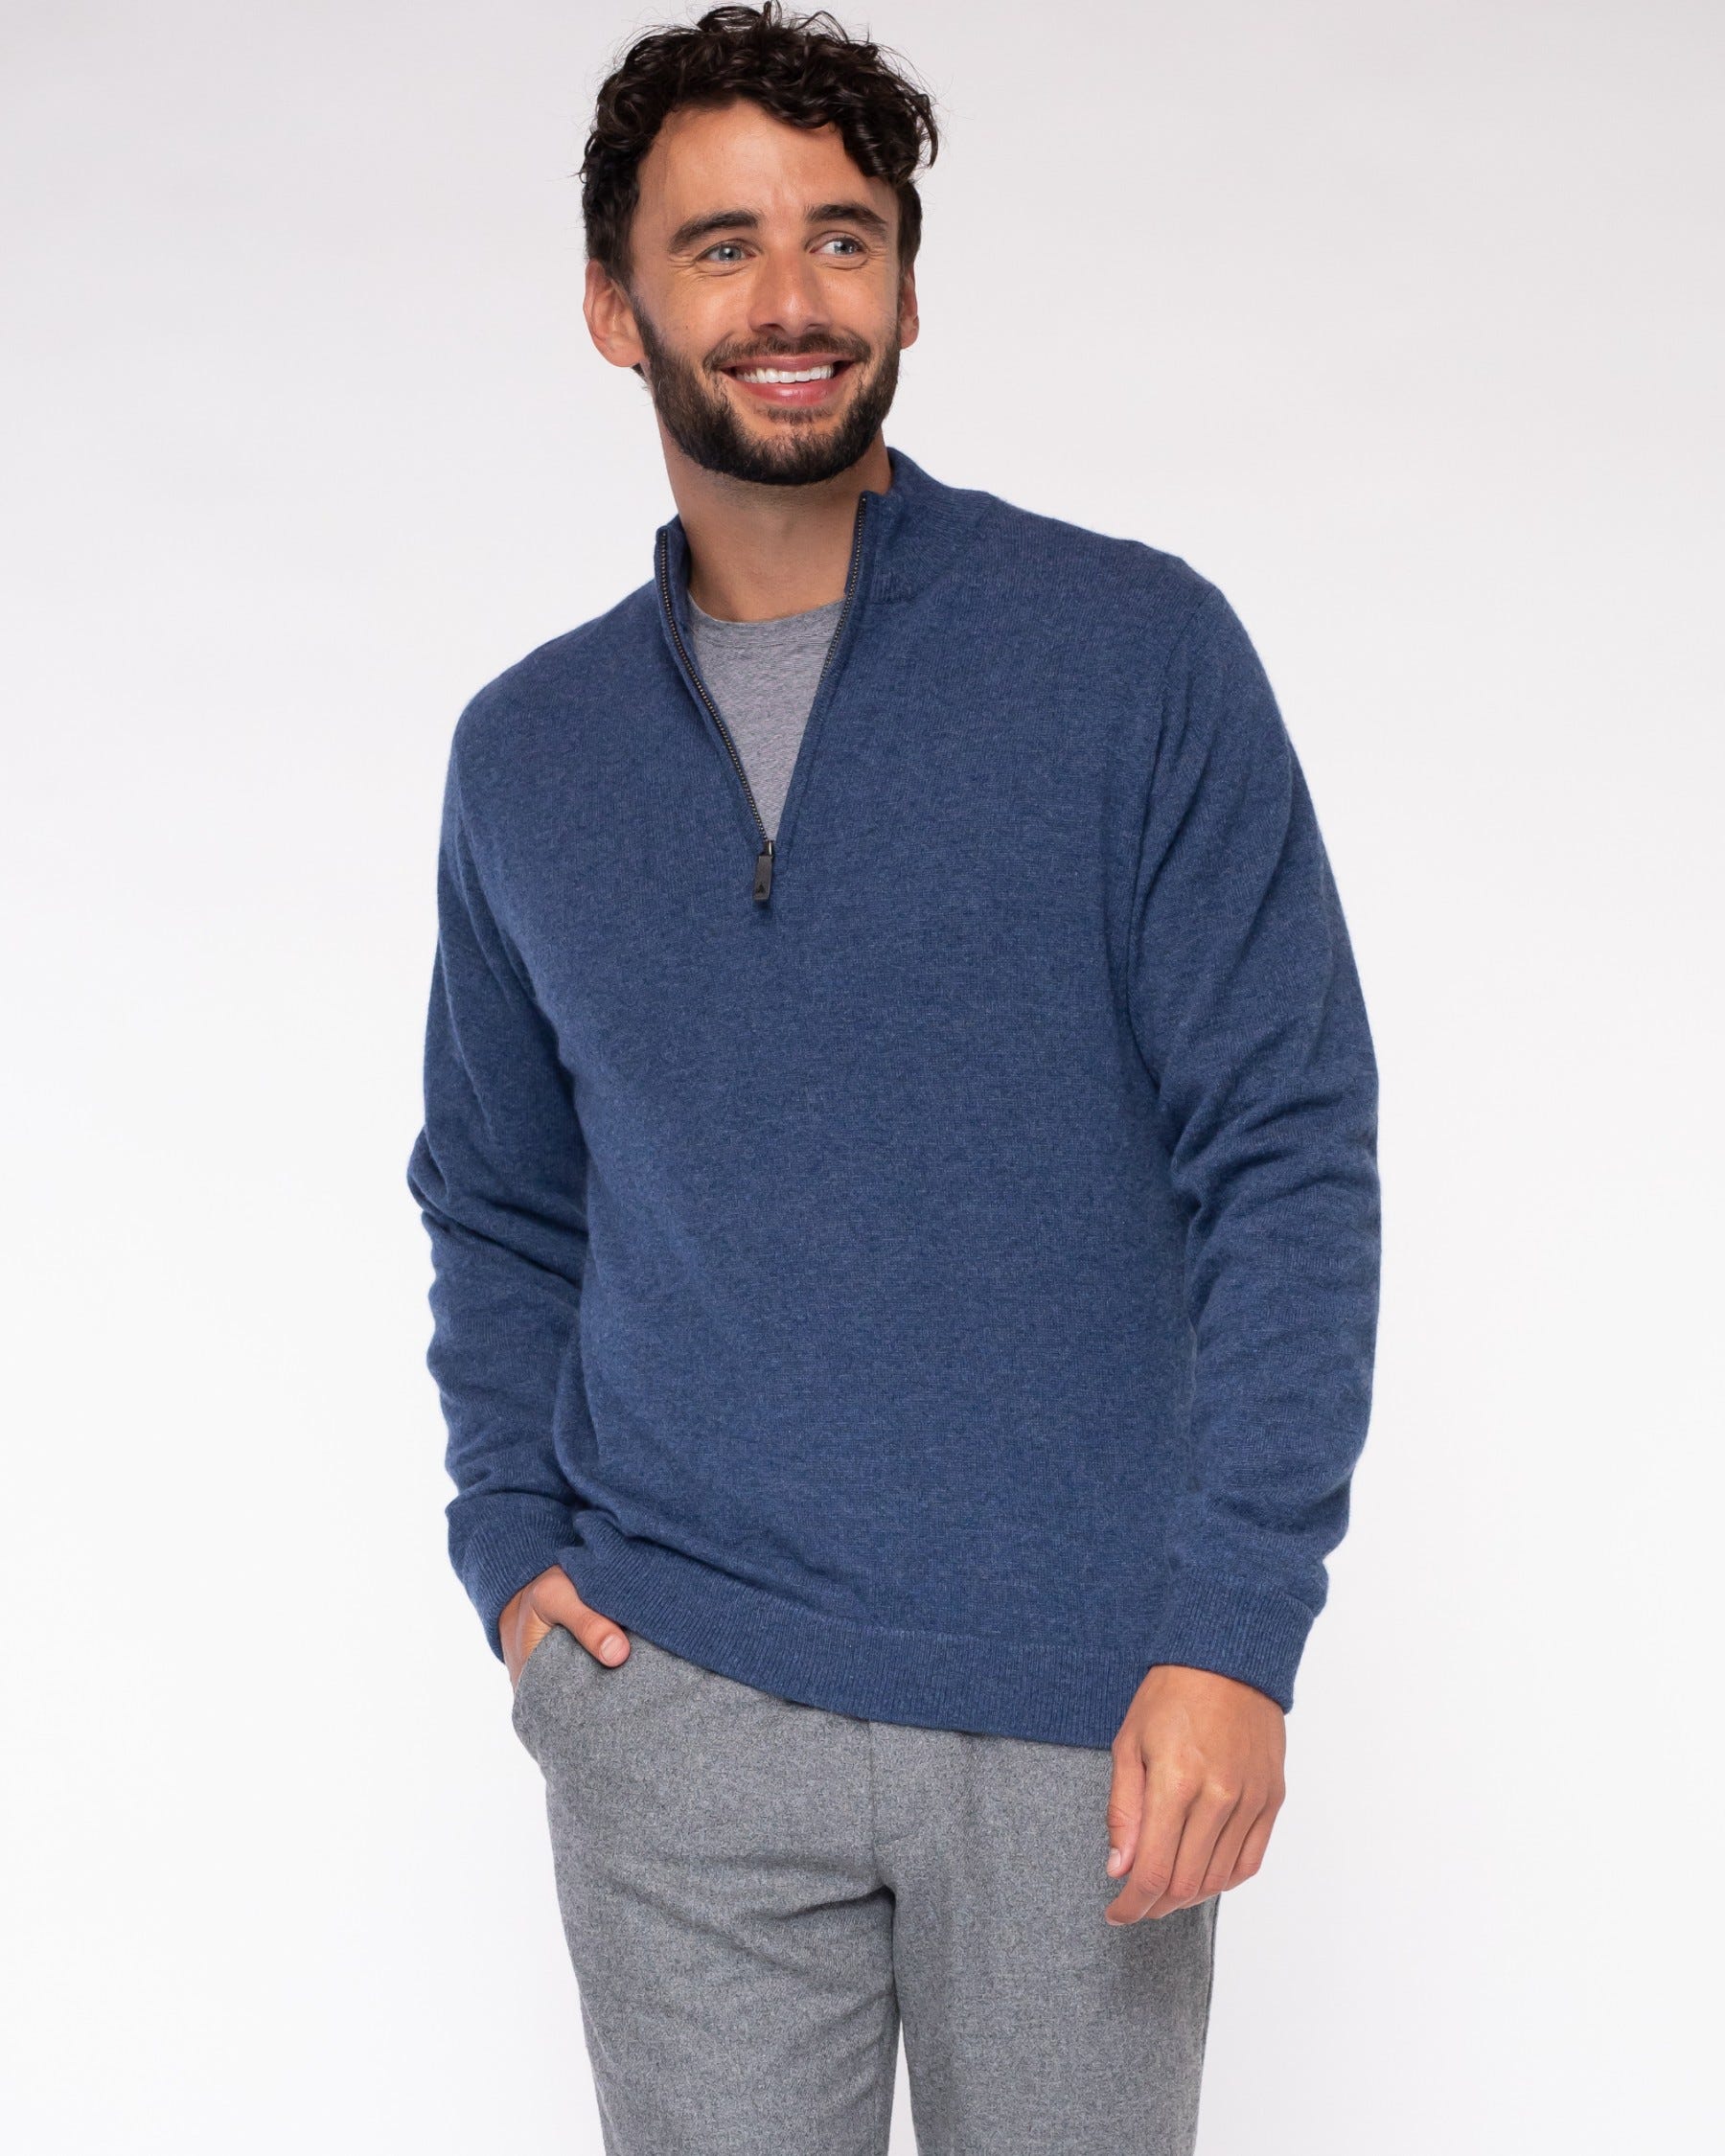 1/4 Zip Mock Neck 100% Cashmere Pullover Sweater (Choice of Colors) by Alashan Cashmere